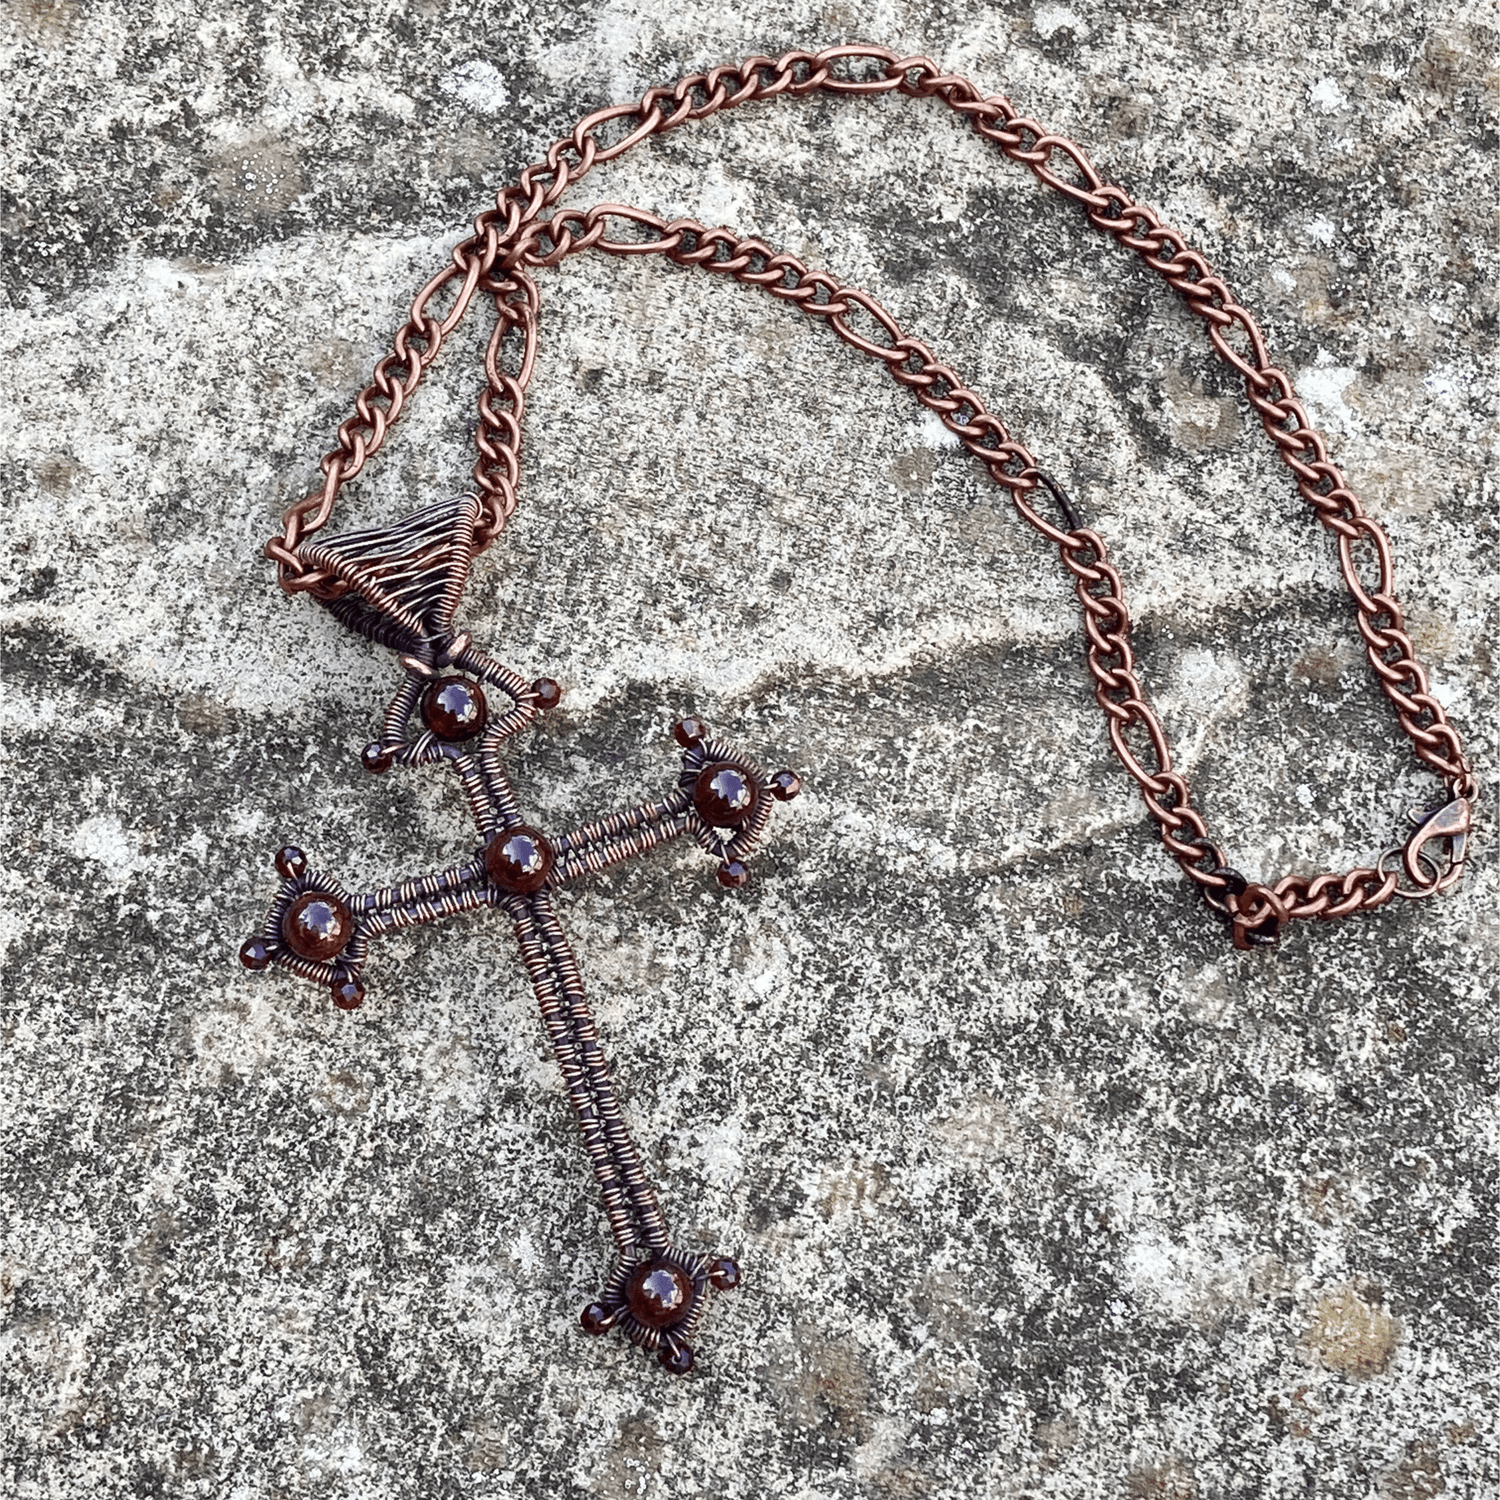 Handmade Garnet Gemstone And Patinaed Wire Wrapped Copper Pendant Necklace